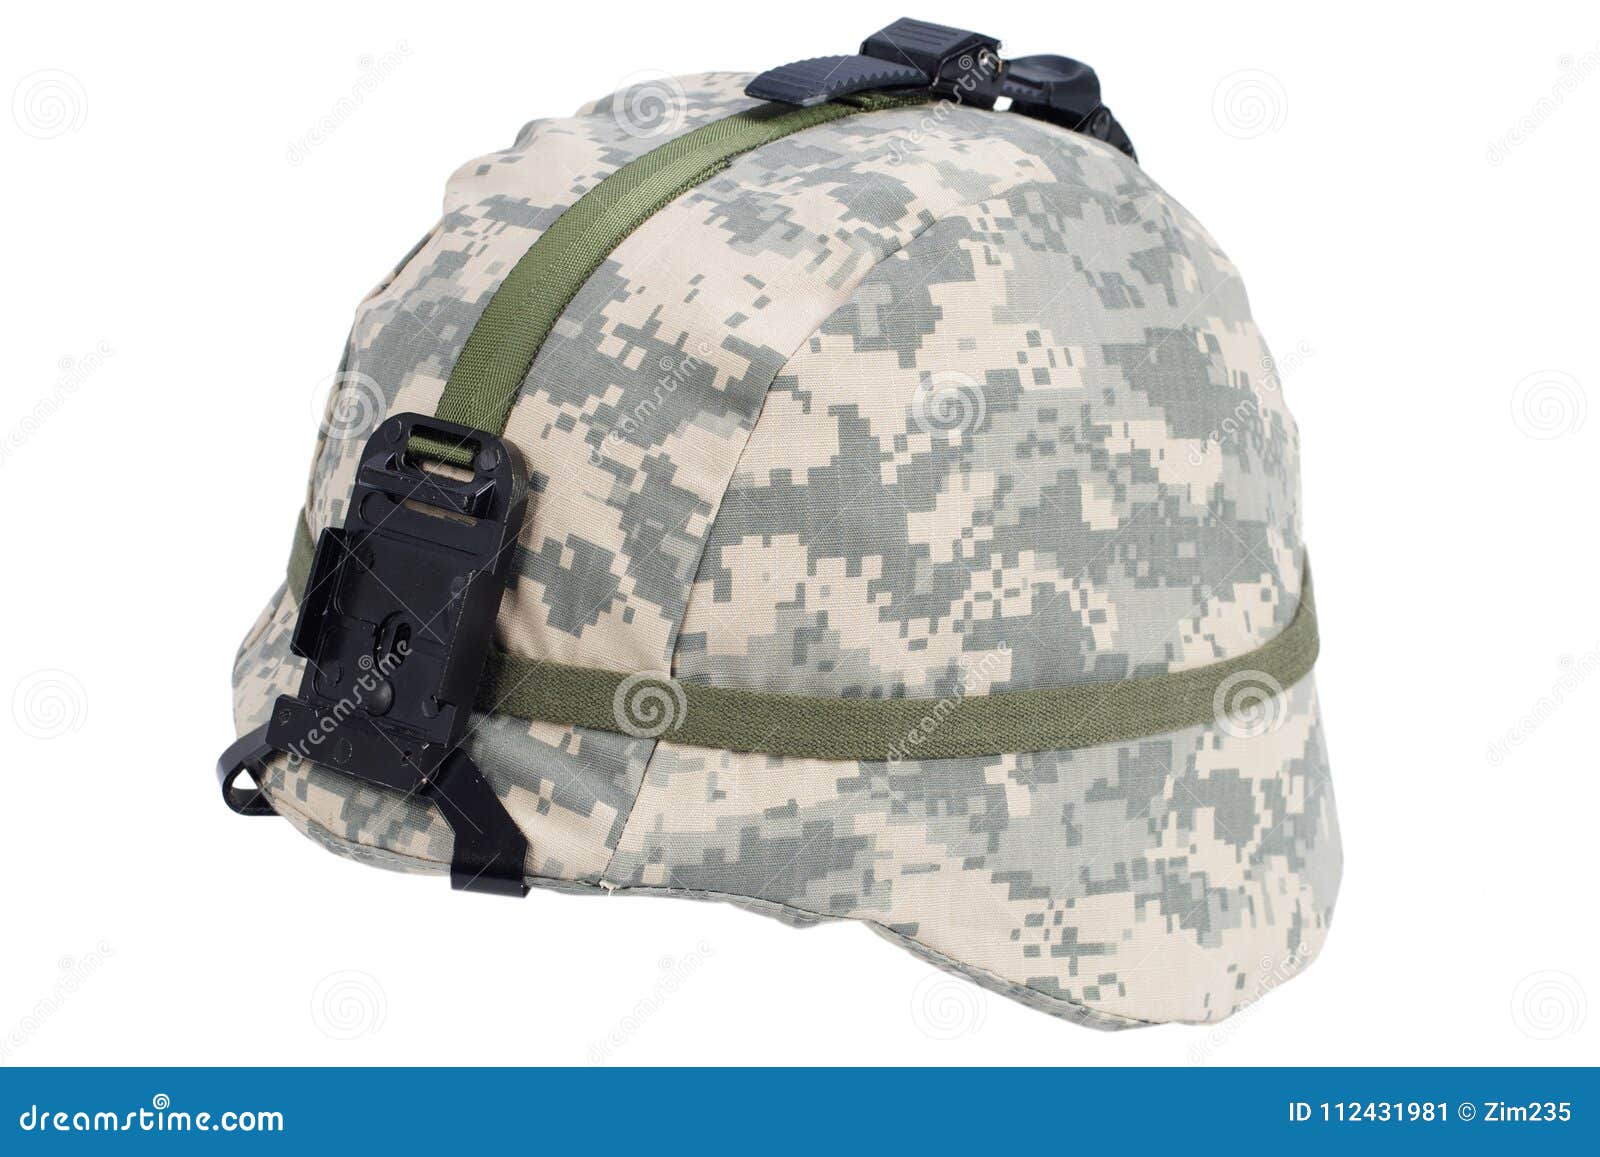 Us Army Kevlar Helmet with Night Vision Mount Stock Image - Image